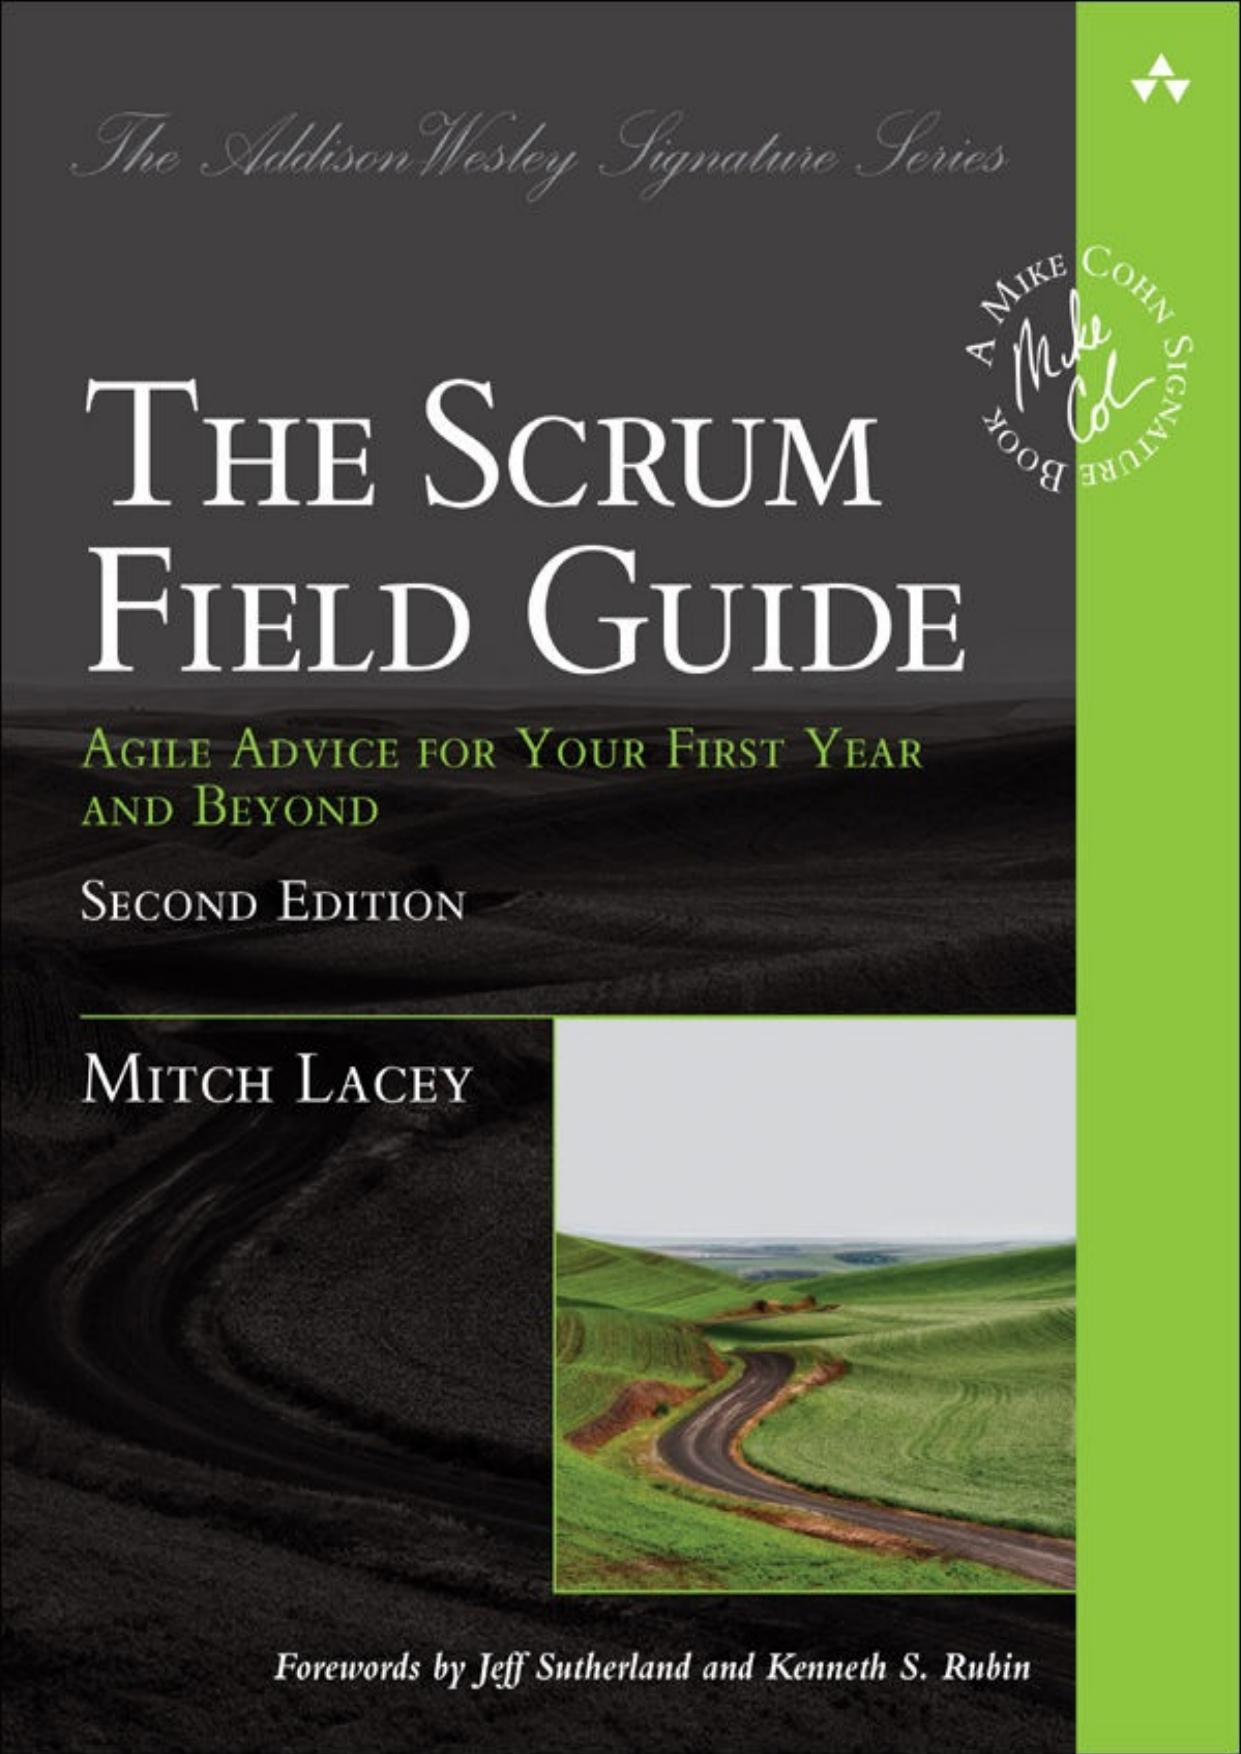 The Scrum Field Guide: Agile Advice for Your First Year and Beyond - 2nd. Edition